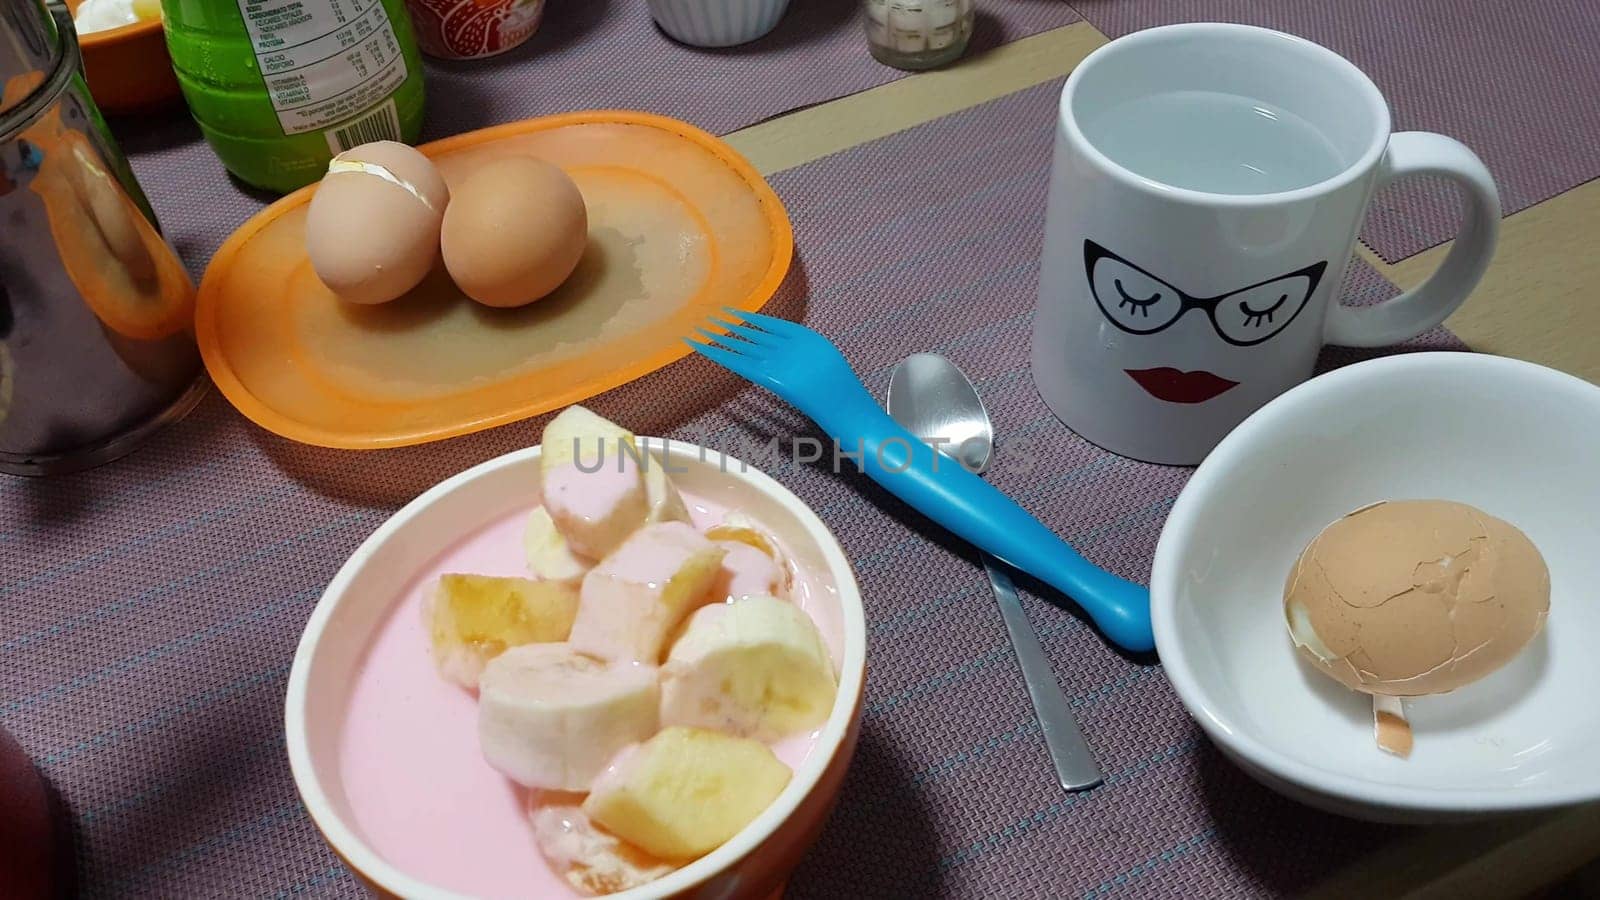 Simple home breakfast scene with boiled eggs, sliced bananas in a bowl, and a playful mug